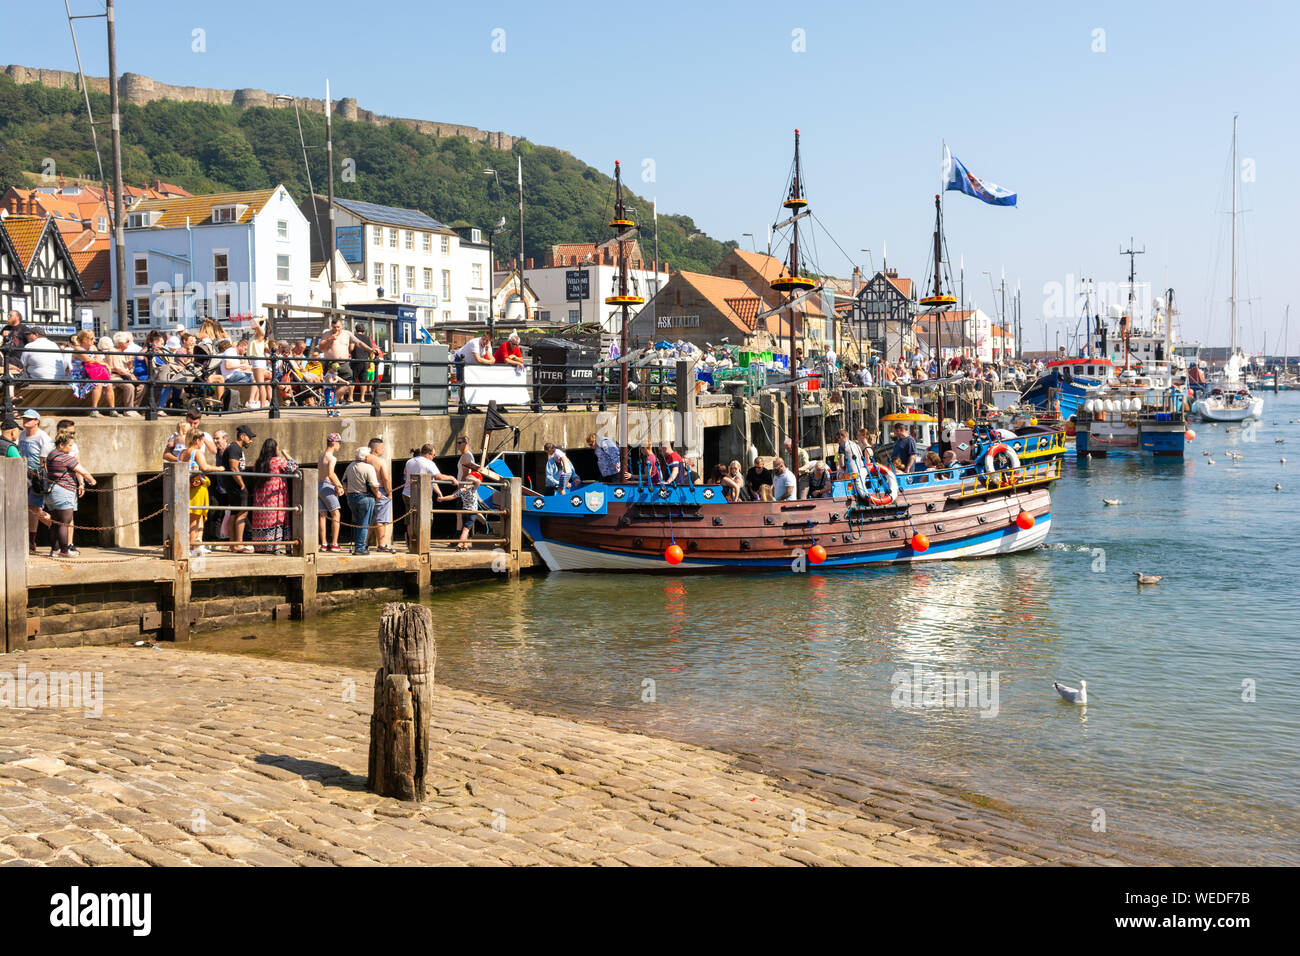 Pleasure boats and crowds of people on the quay and quayside at Scarborough, North Yorkshire, UK, during August bank holiday heatwave, 2019 Stock Photo